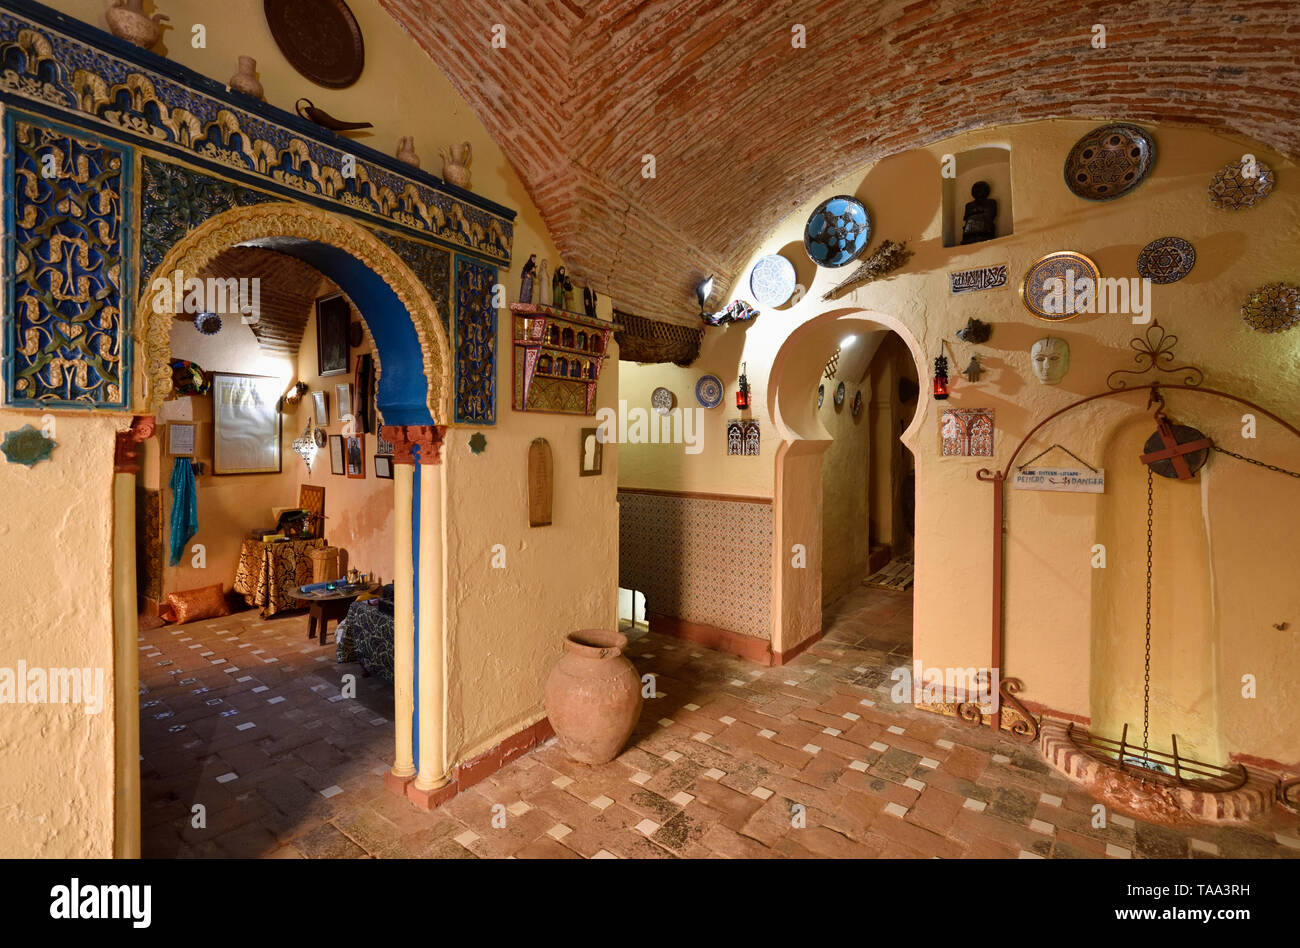 The Casa Museo Arabe Yusuf al Burch, is a house of an arab merchant of the 12th century that is now a museum. Caceres, a Unesco World Heritage Site. S Stock Photo